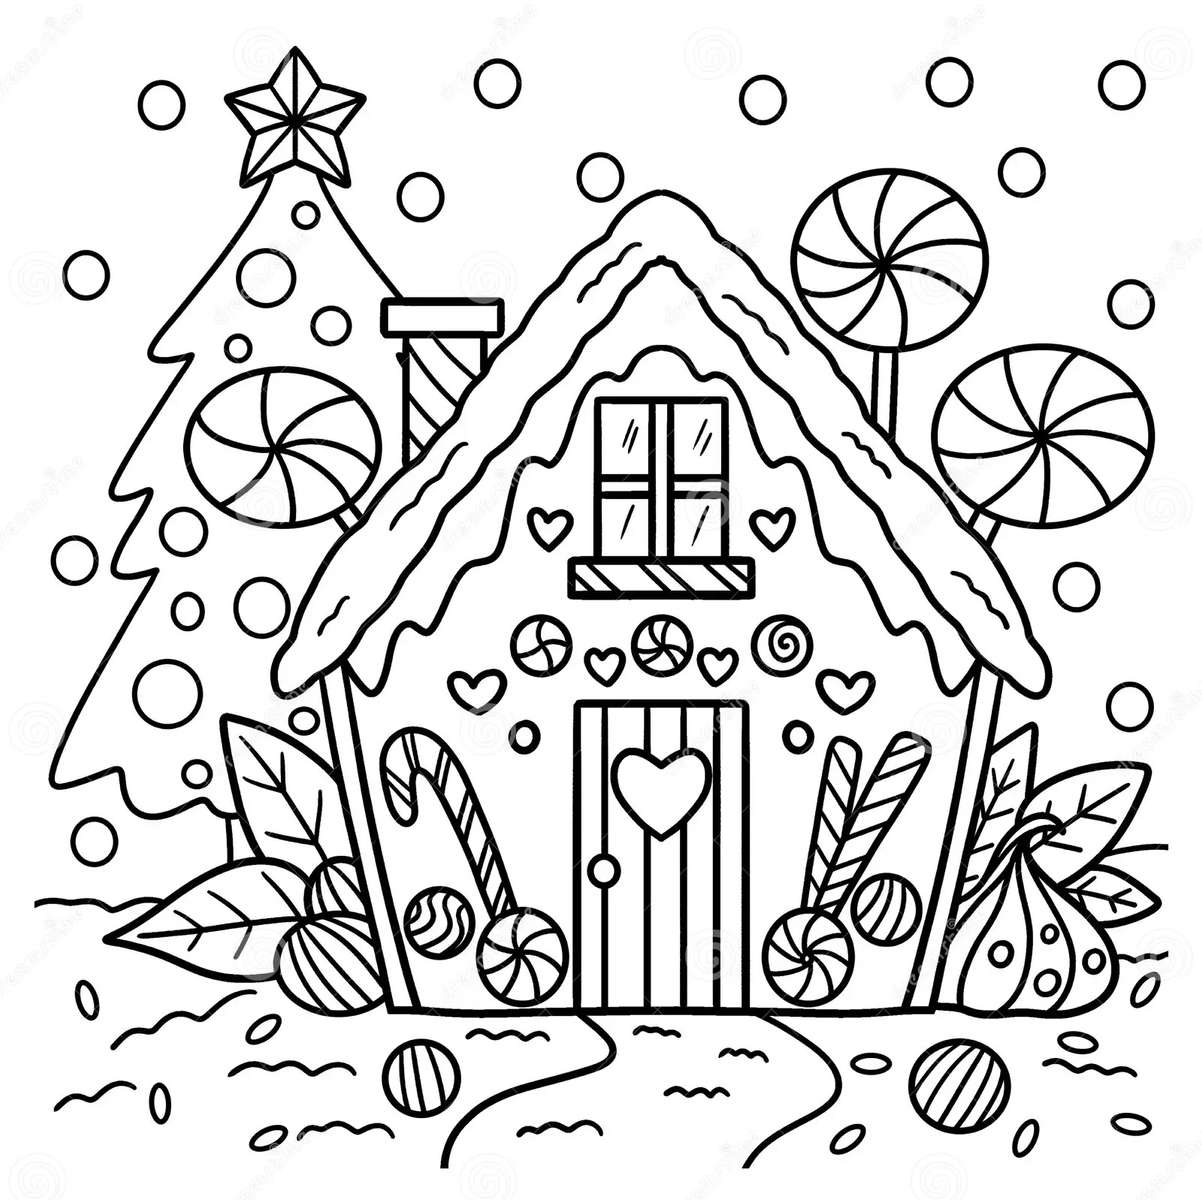 Gingerbread house online puzzle